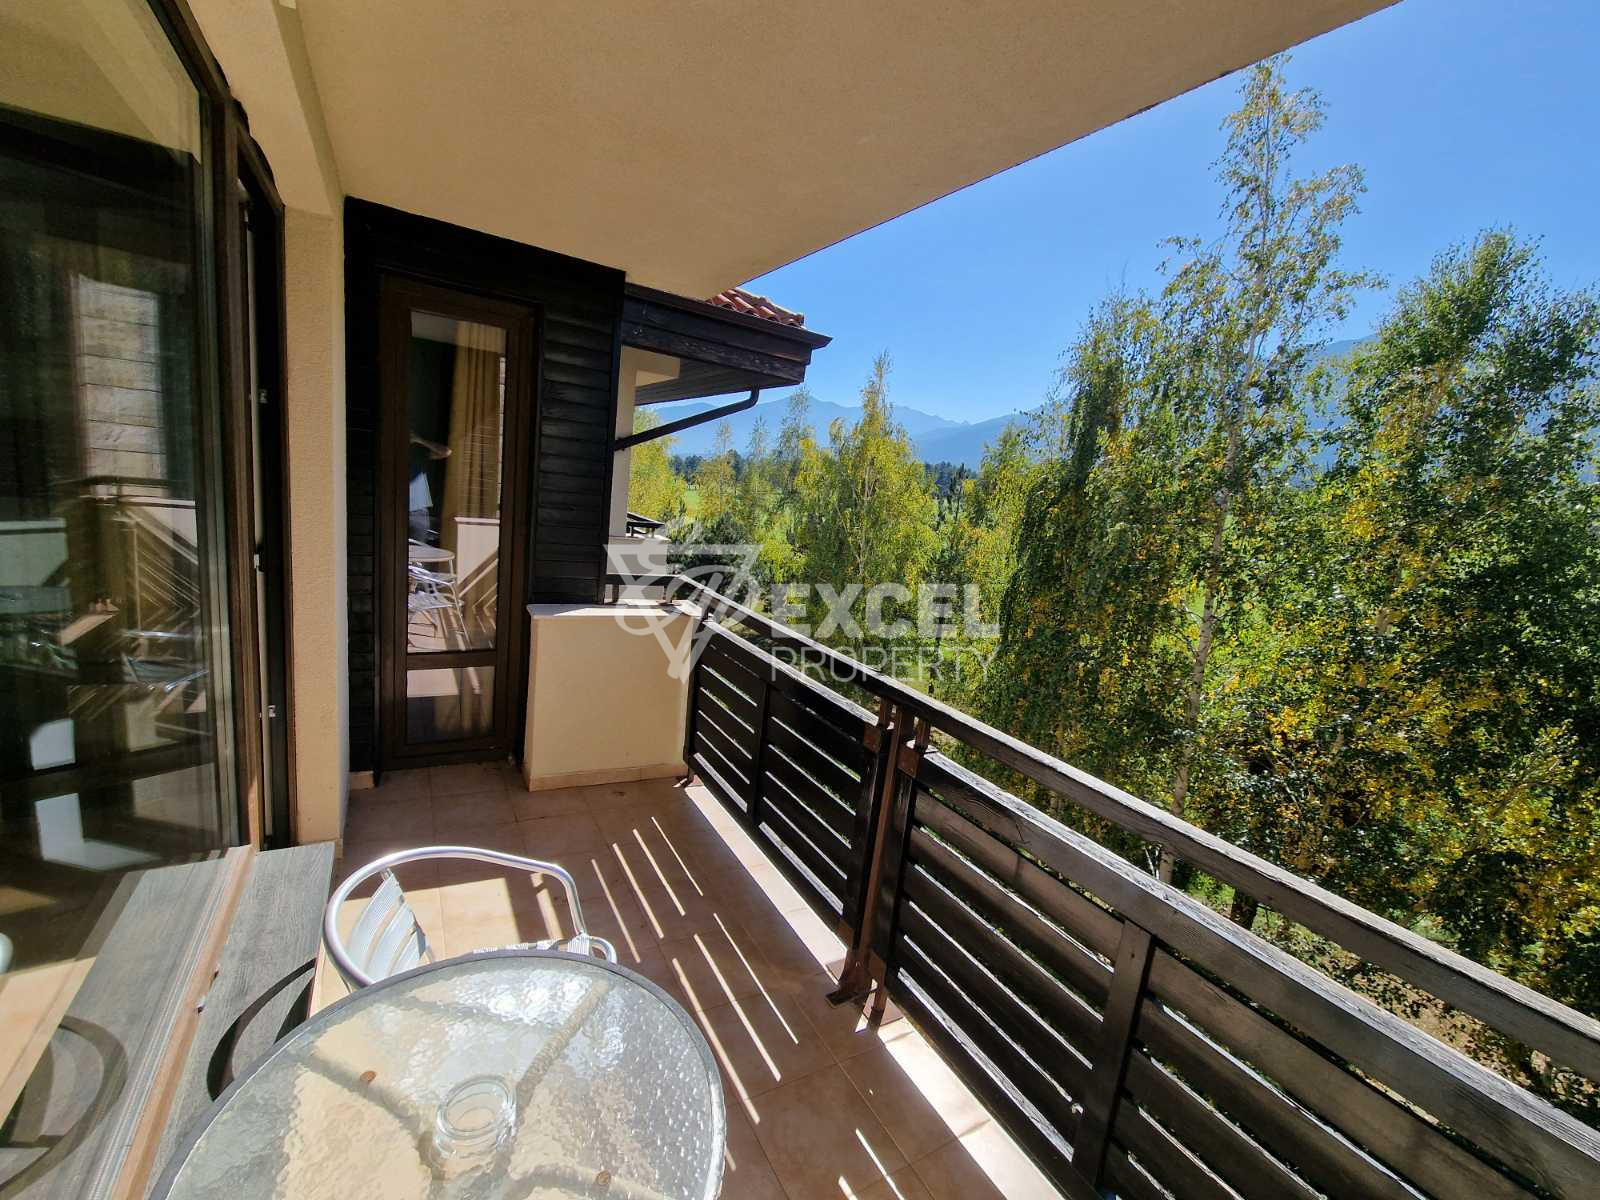 Unique two-bedroom apartment with a stunning view of Pirin in a 4-star complex